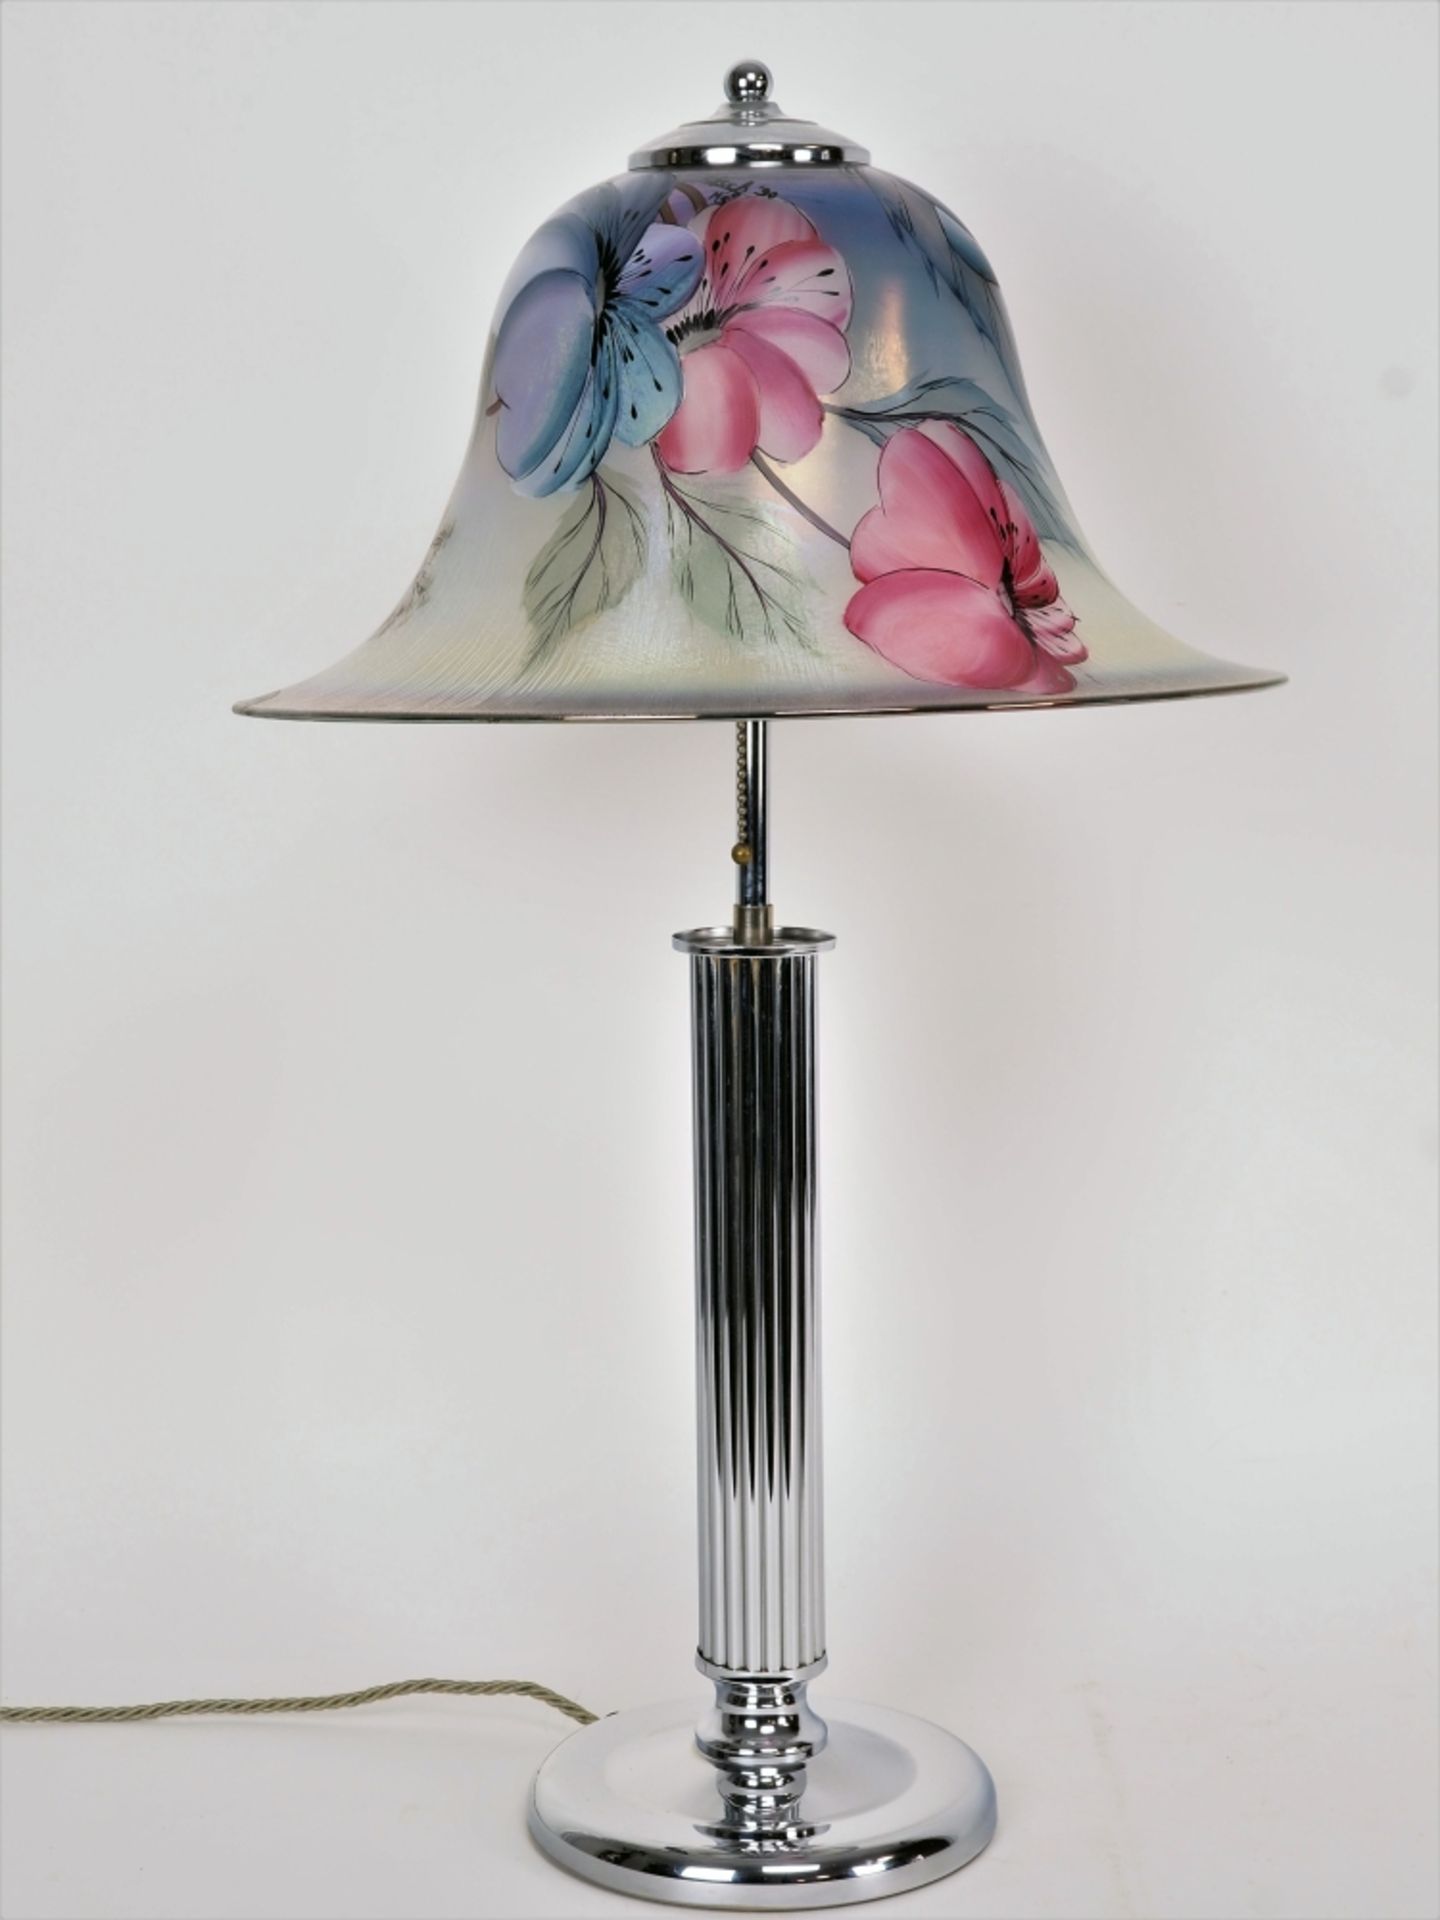 Large Art Deco table lamp, probably 30s